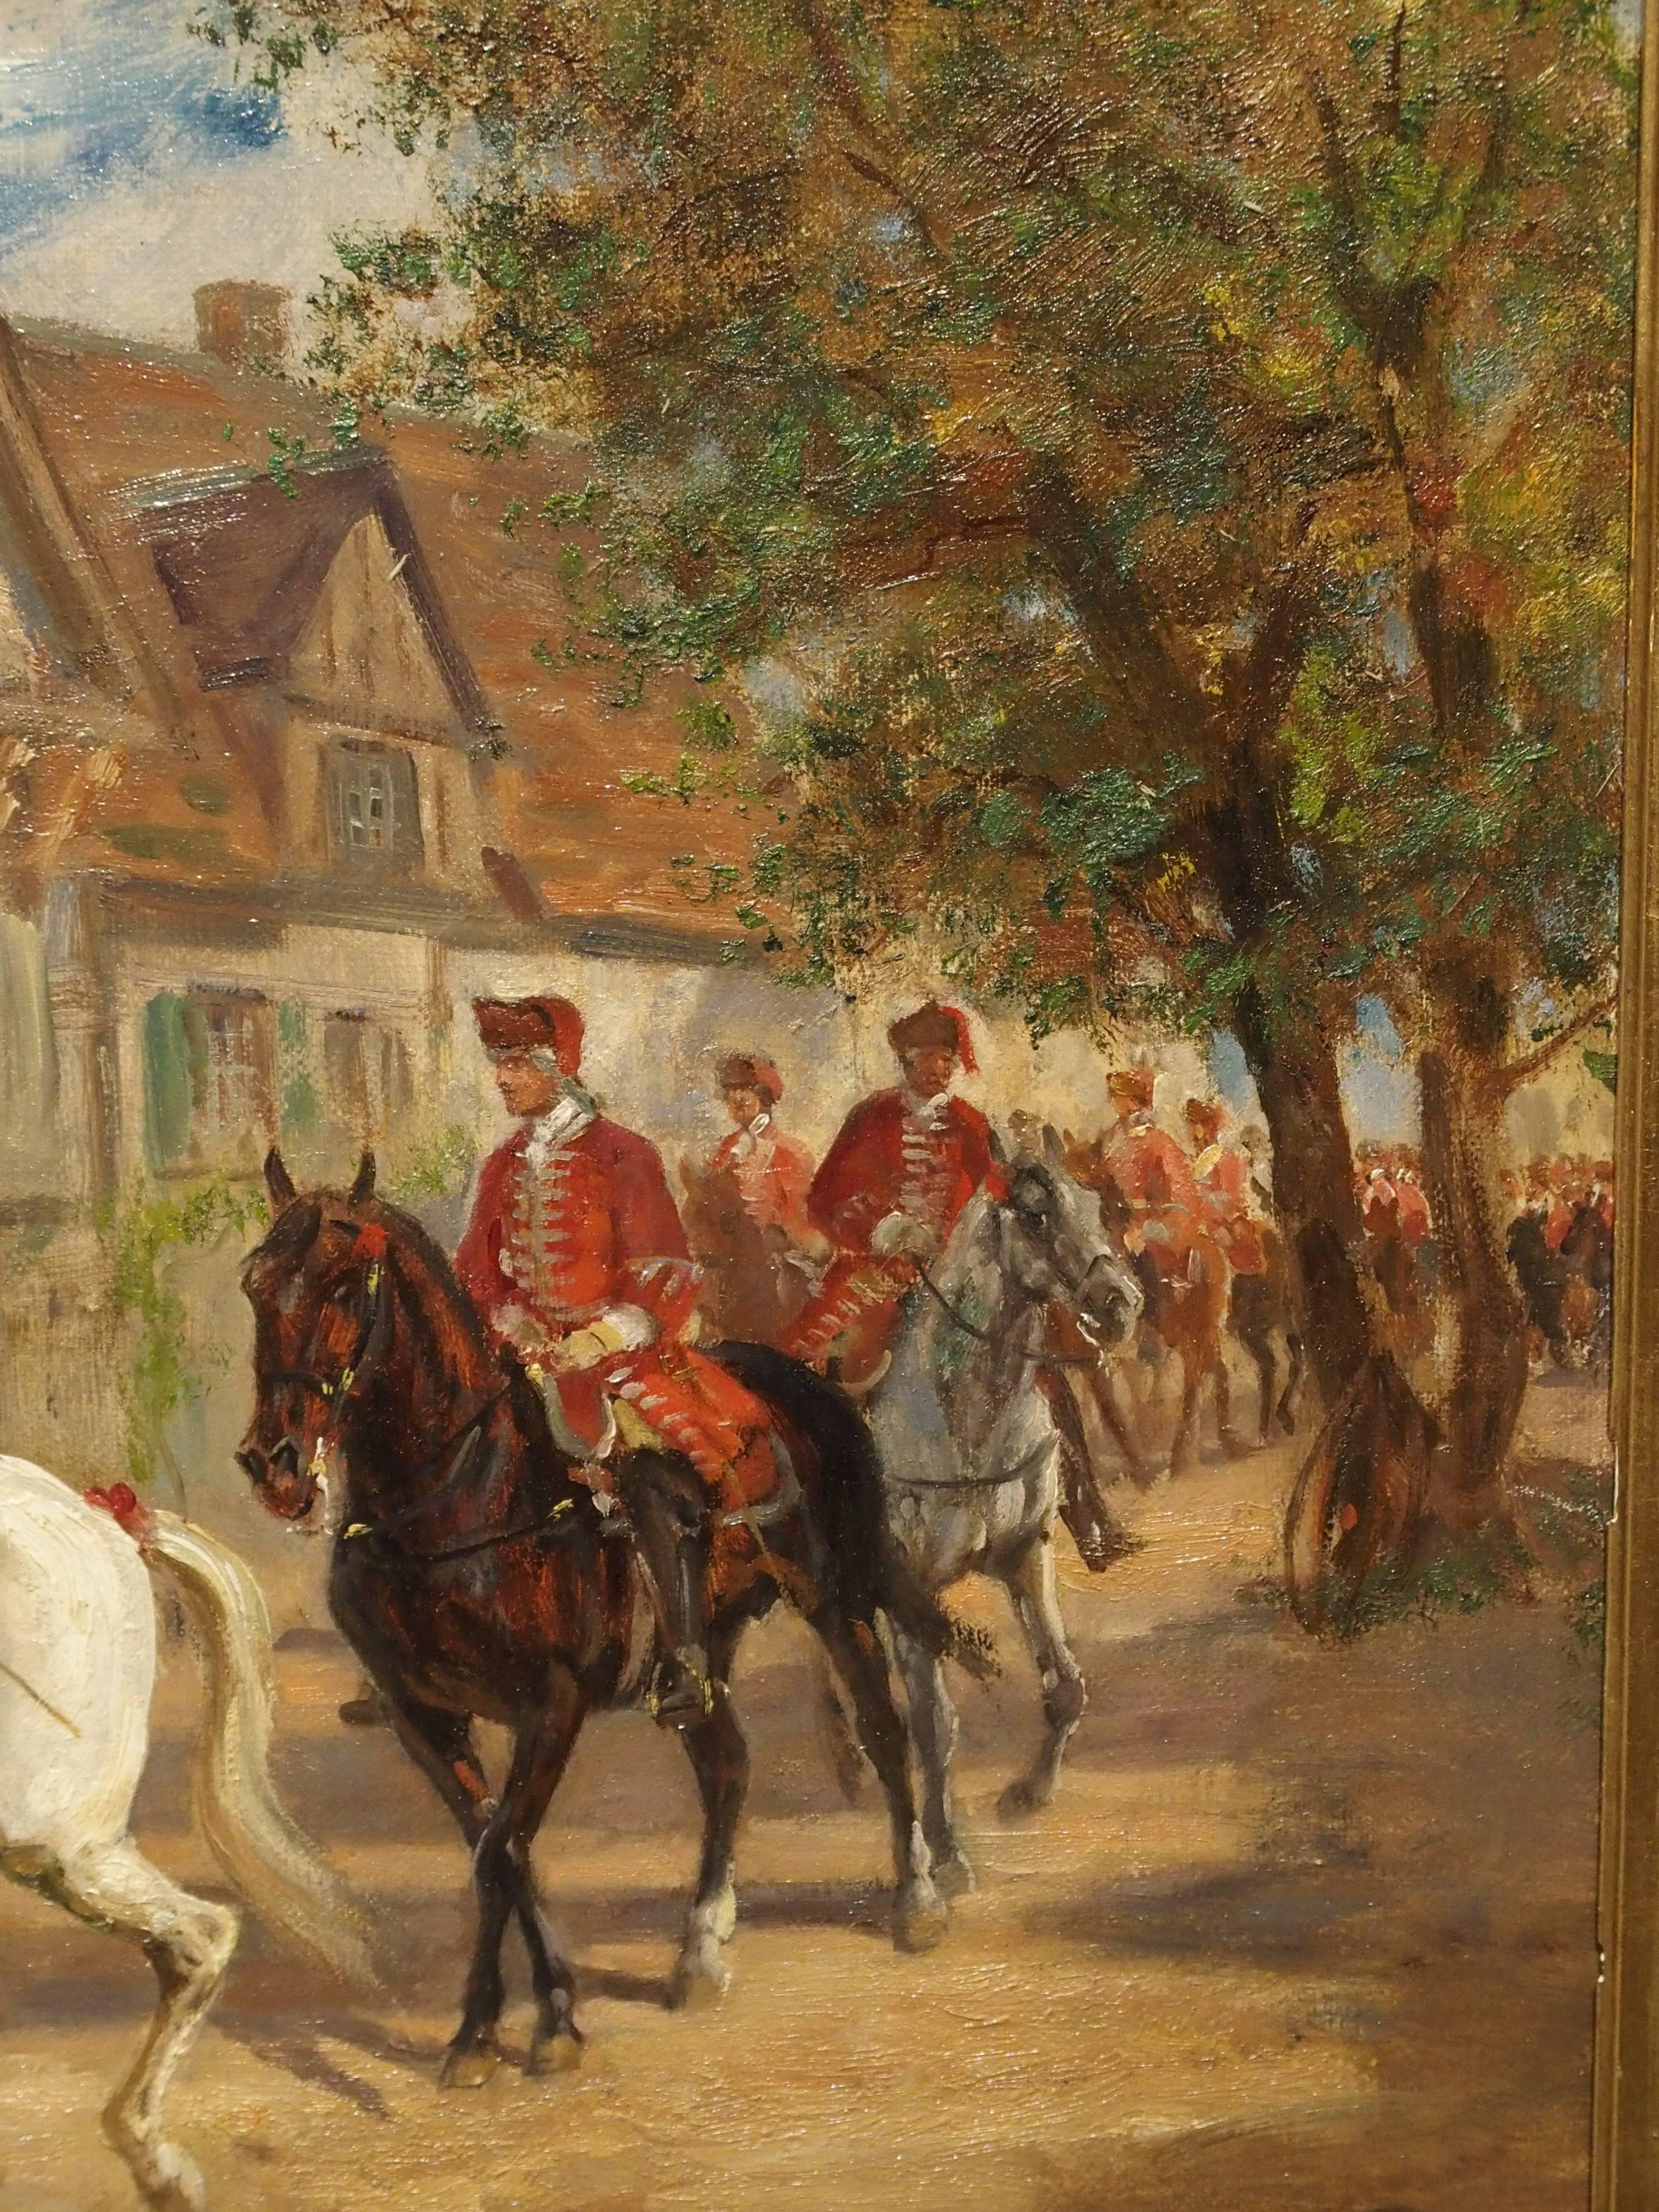 The Cavalry Entering a Village in France, Napoleonic Wars

This wonderful oil painting by Raymond Desvarreux depicts the cavalry entering a village in France, during the Napoleonic Wars. To their right are buildings and homes with a typical stone